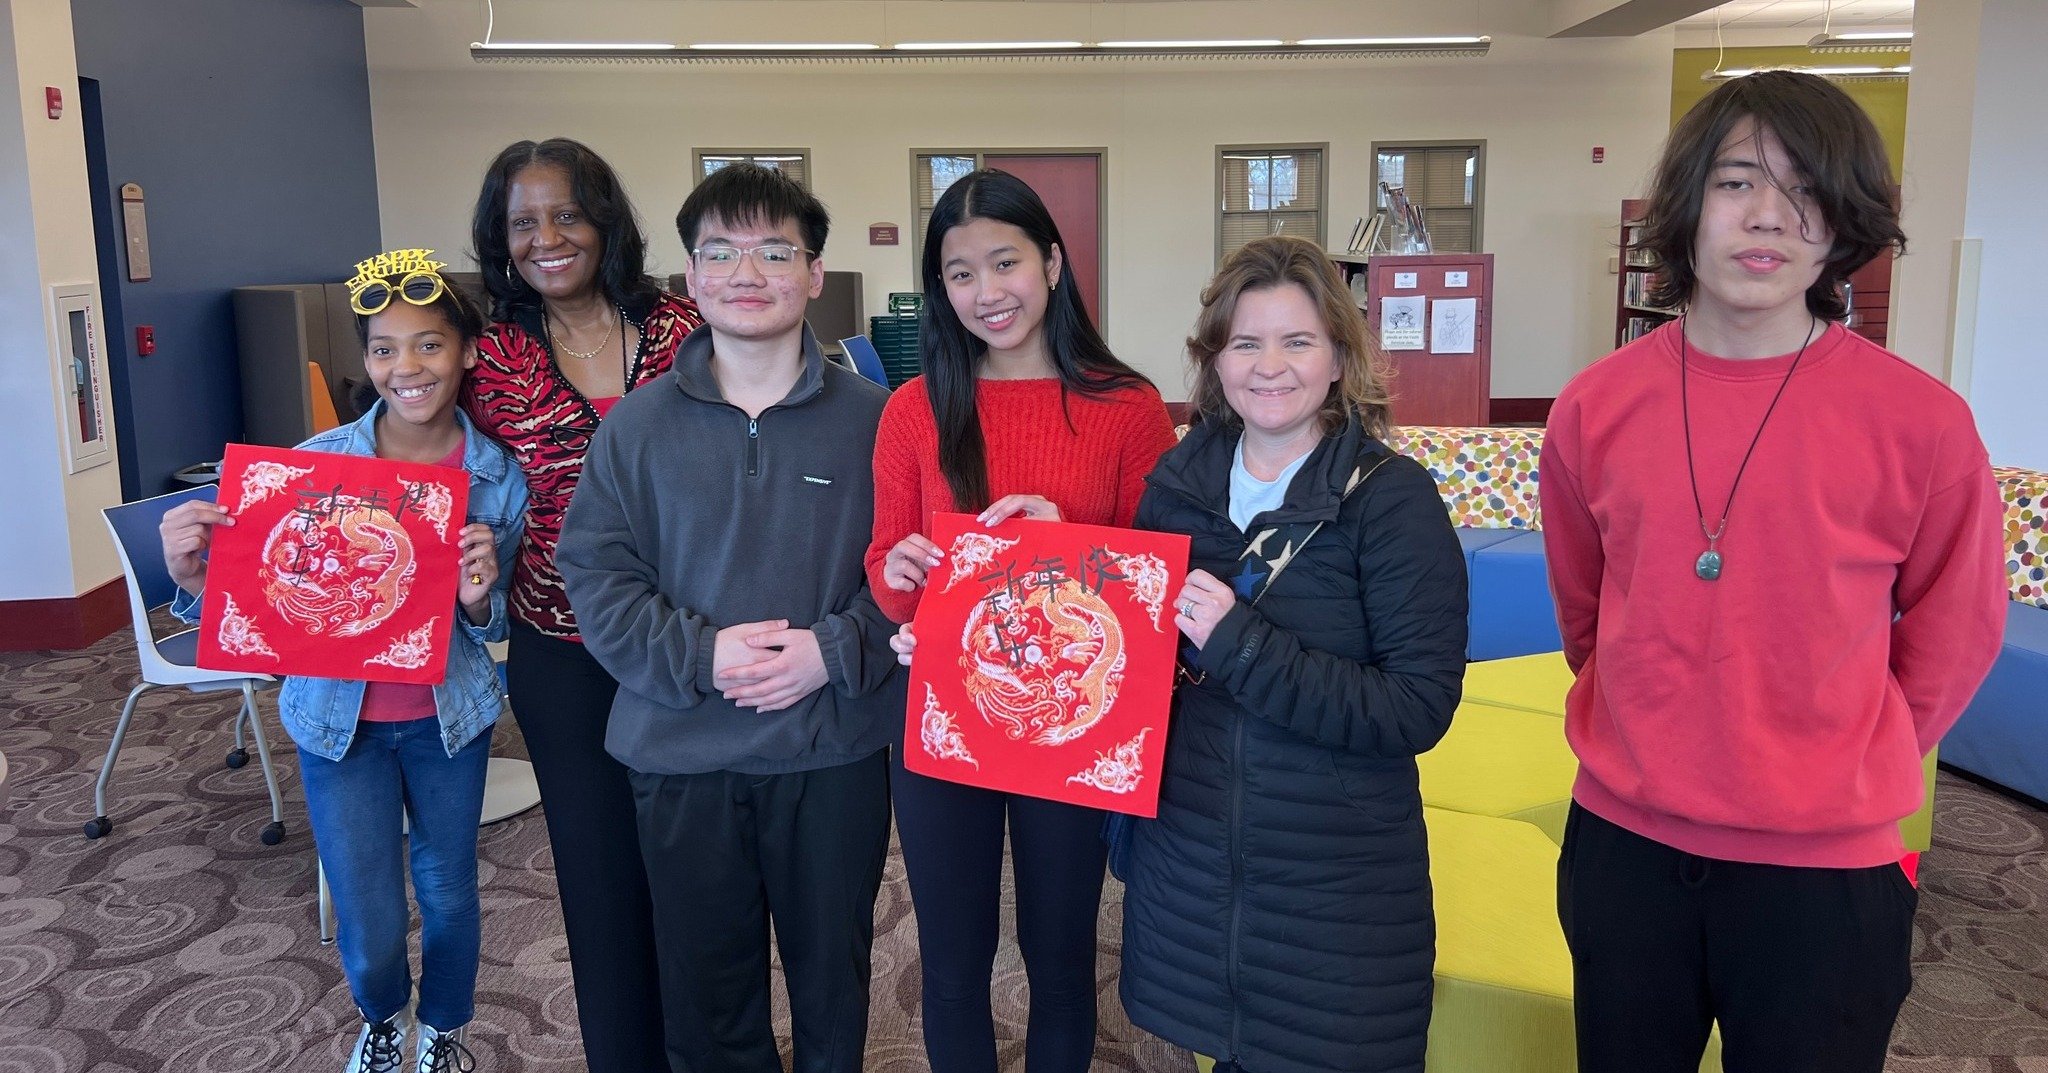 It's #NationalVolunteerWeek, and Flossmoor is so fortunate to be able to partner with students from Parker Jr. High and H-F High School at our activities and events. Our student-volunteers are simply the best! Thank you #ThisIsFlossmoor #Flossmooris1